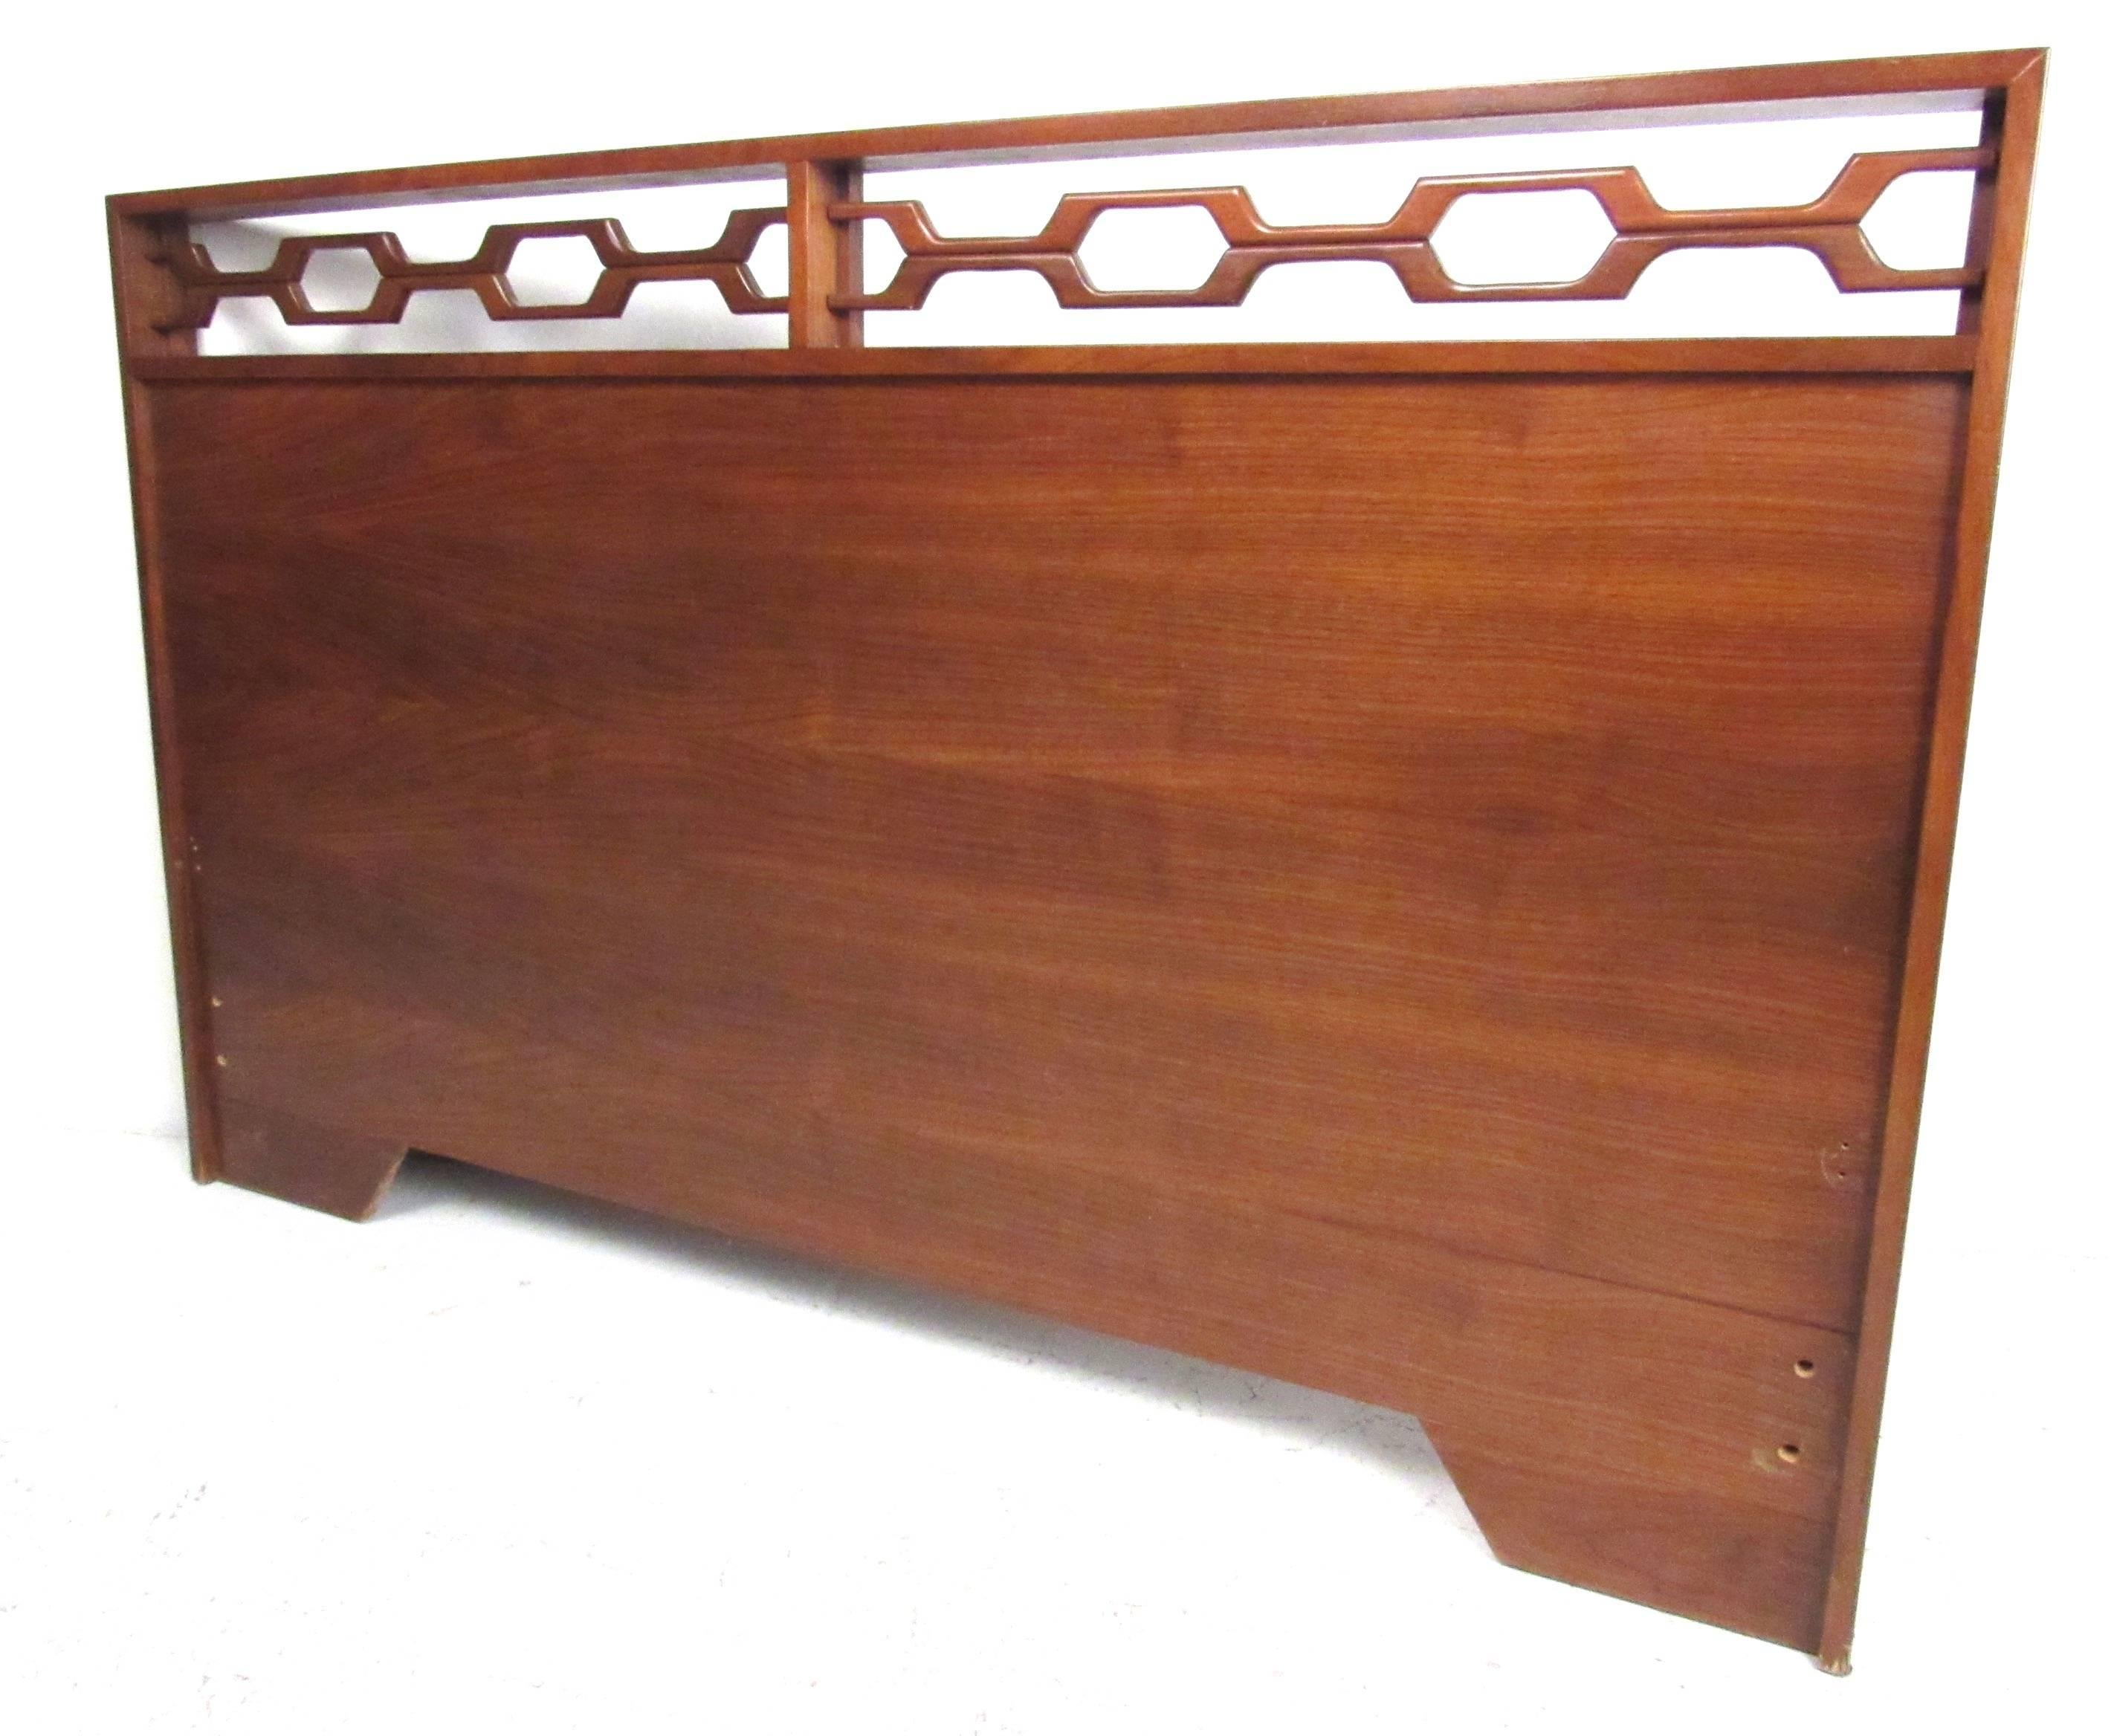 Full size headboard in American walnut, circa 1970s. Please confirm item location (NY or NJ) with dealer.